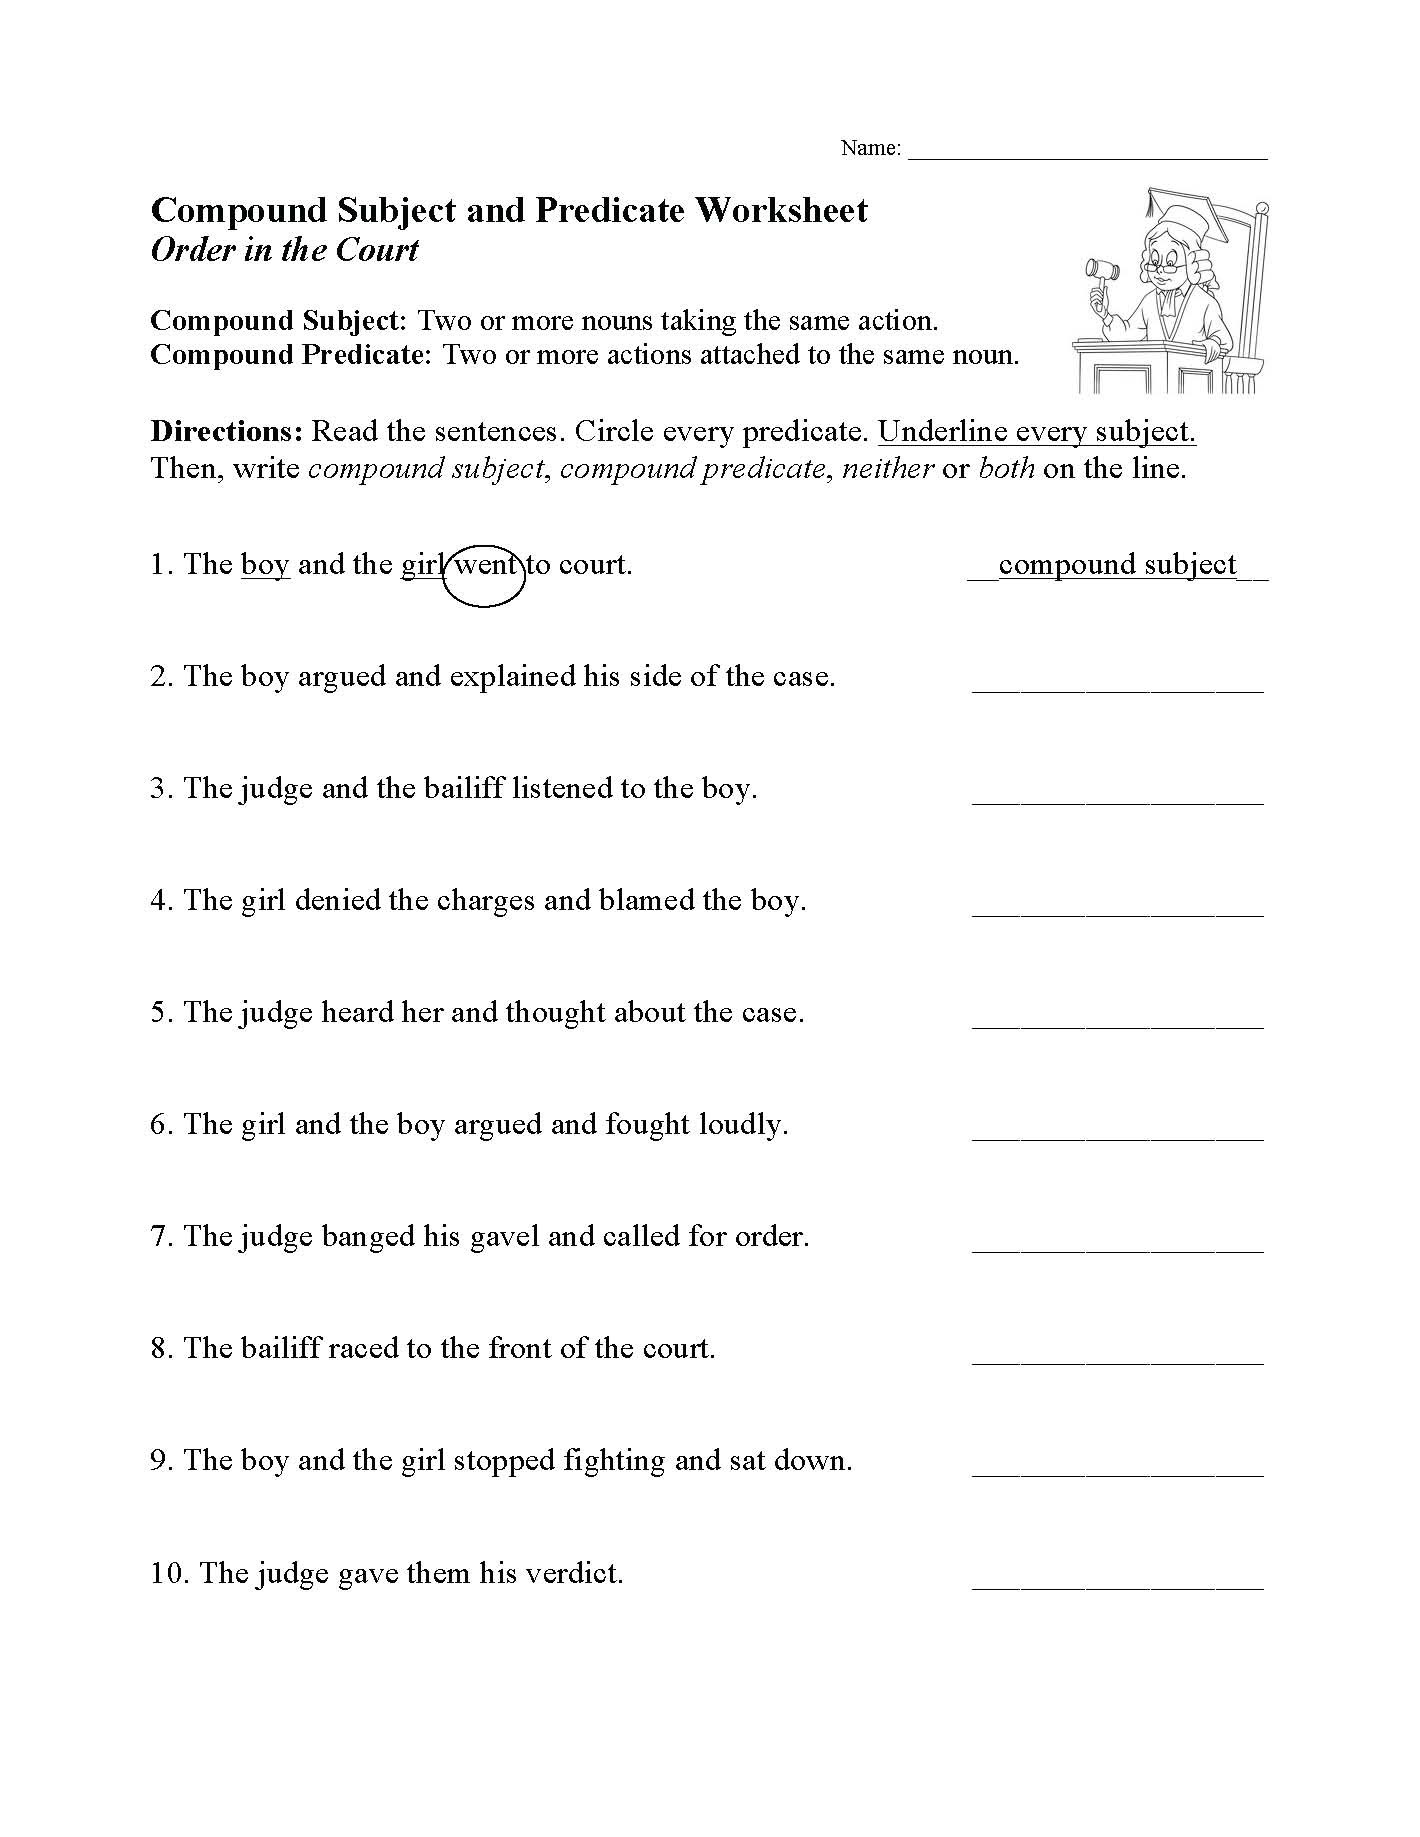 Compound Subject and Predicate Worksheet  Sentence Structure Activity Within Subject Predicate Worksheet Pdf